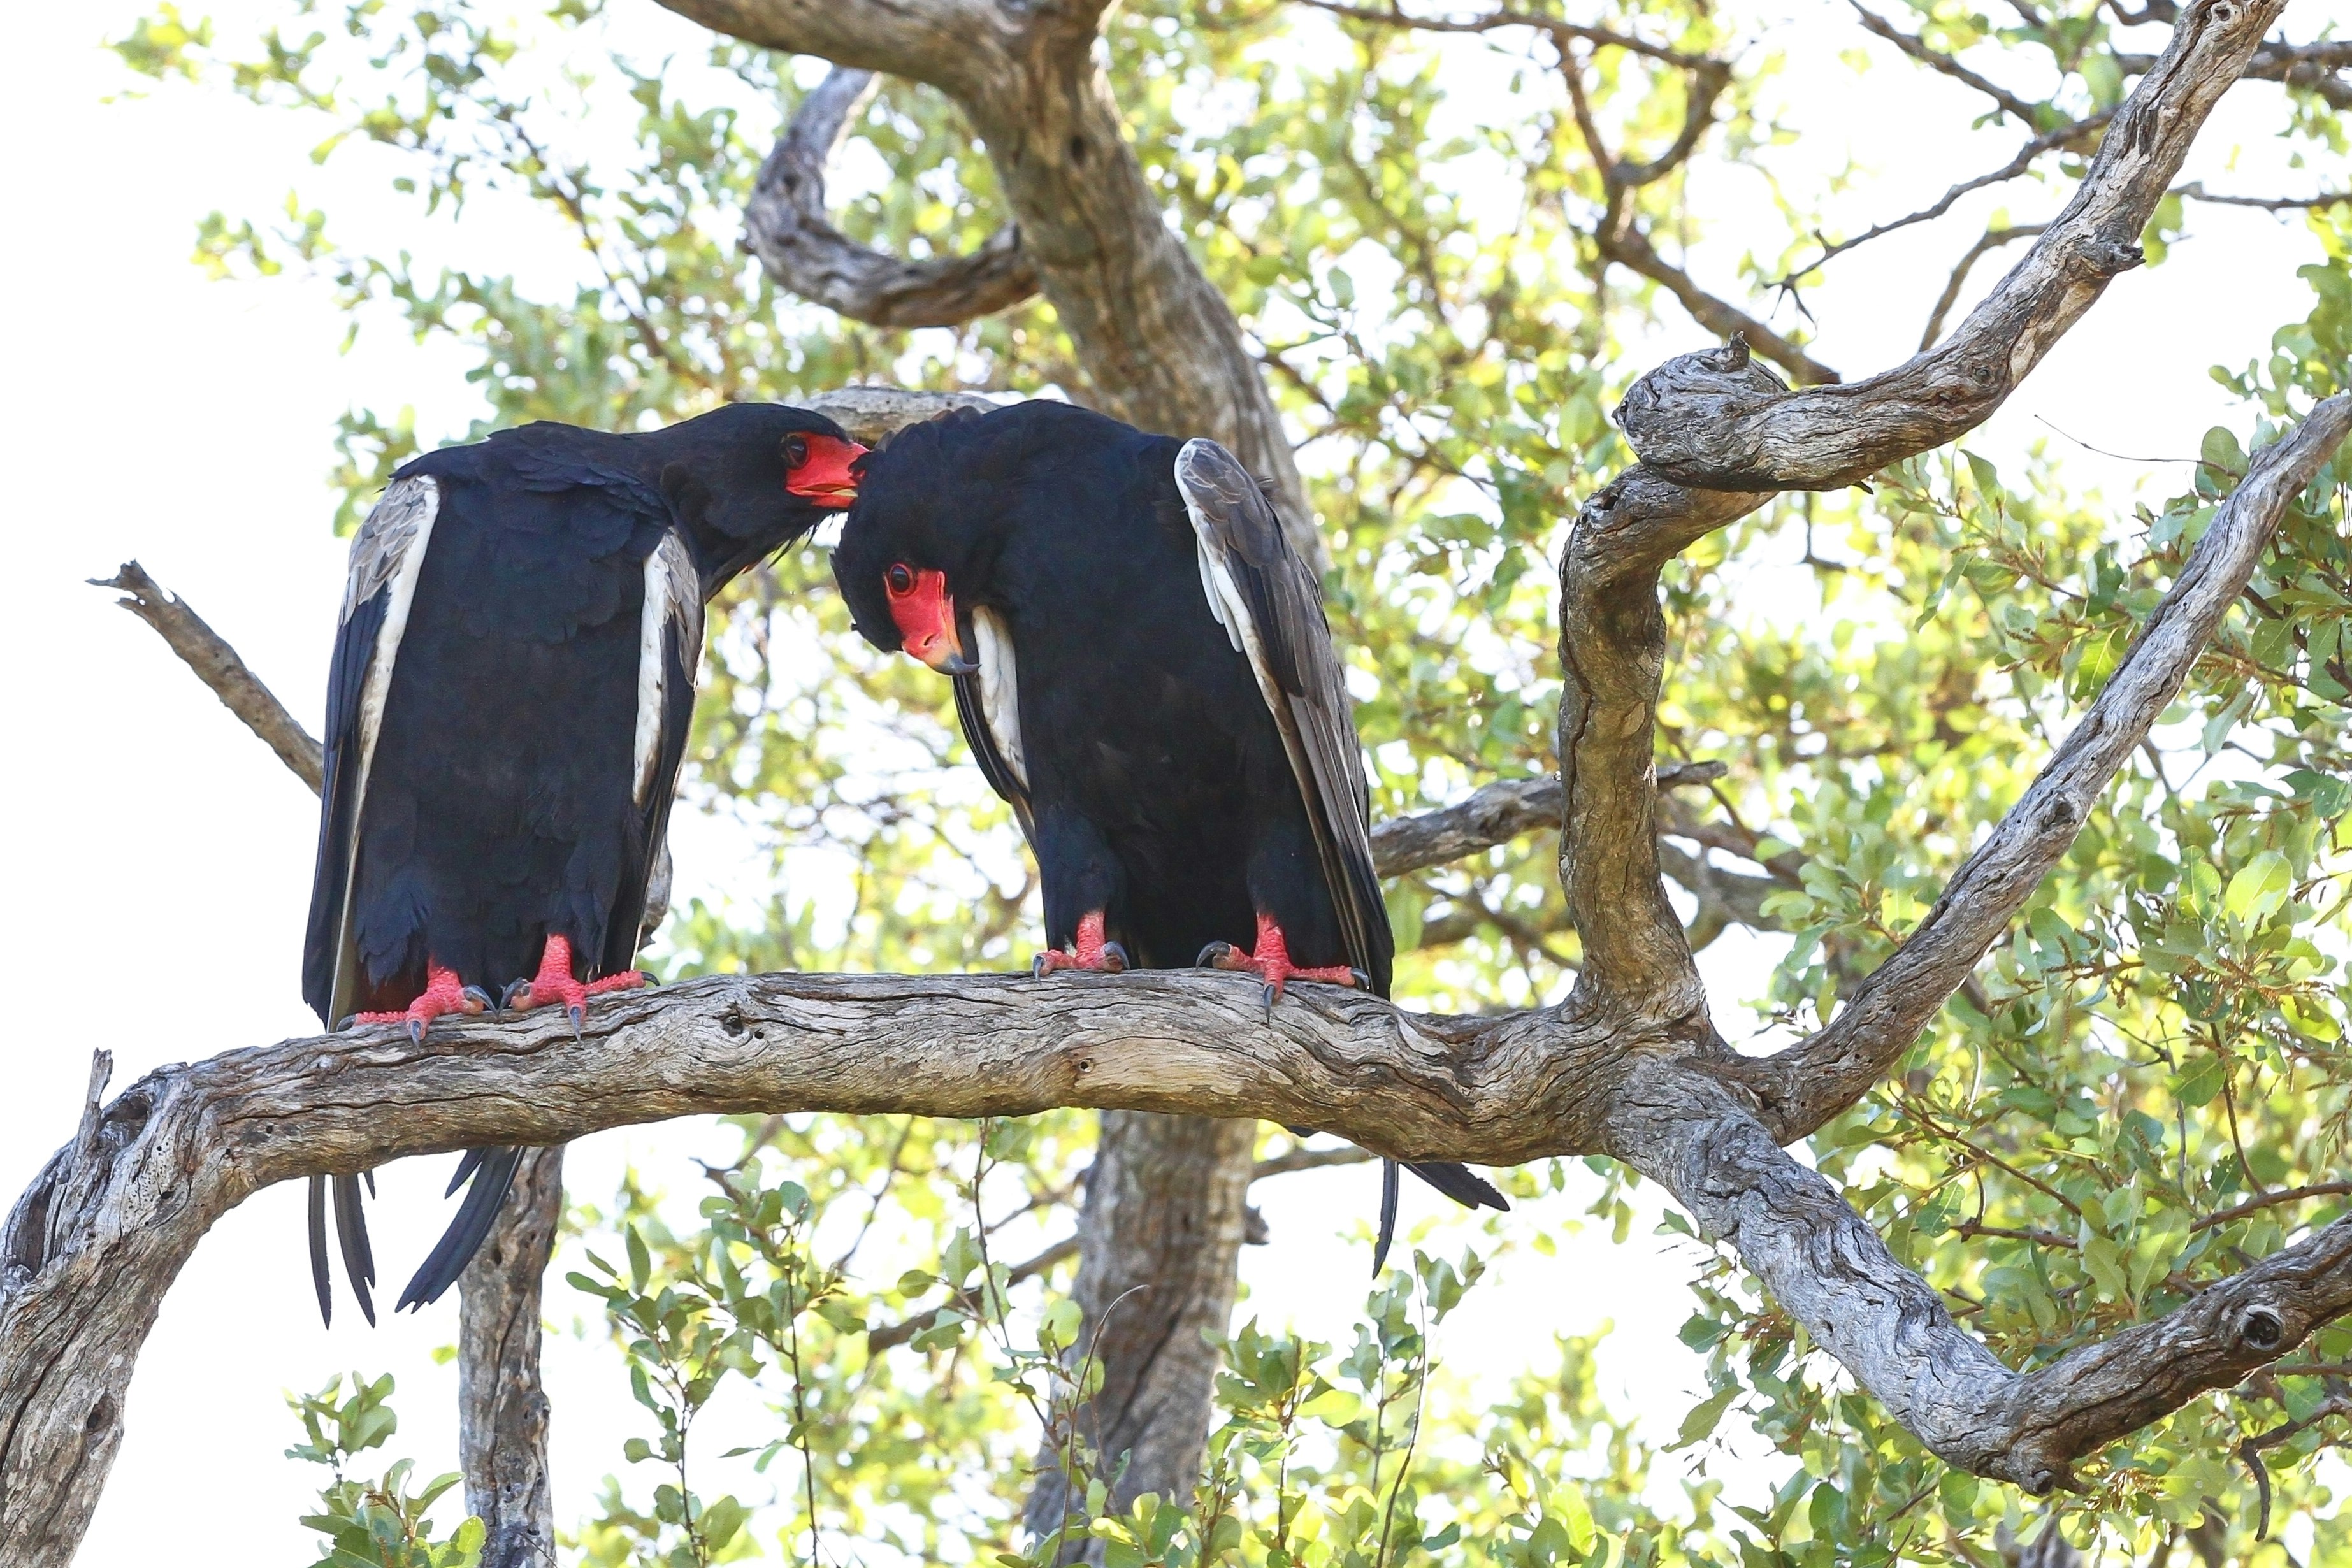 two black birds perched on the tree branch